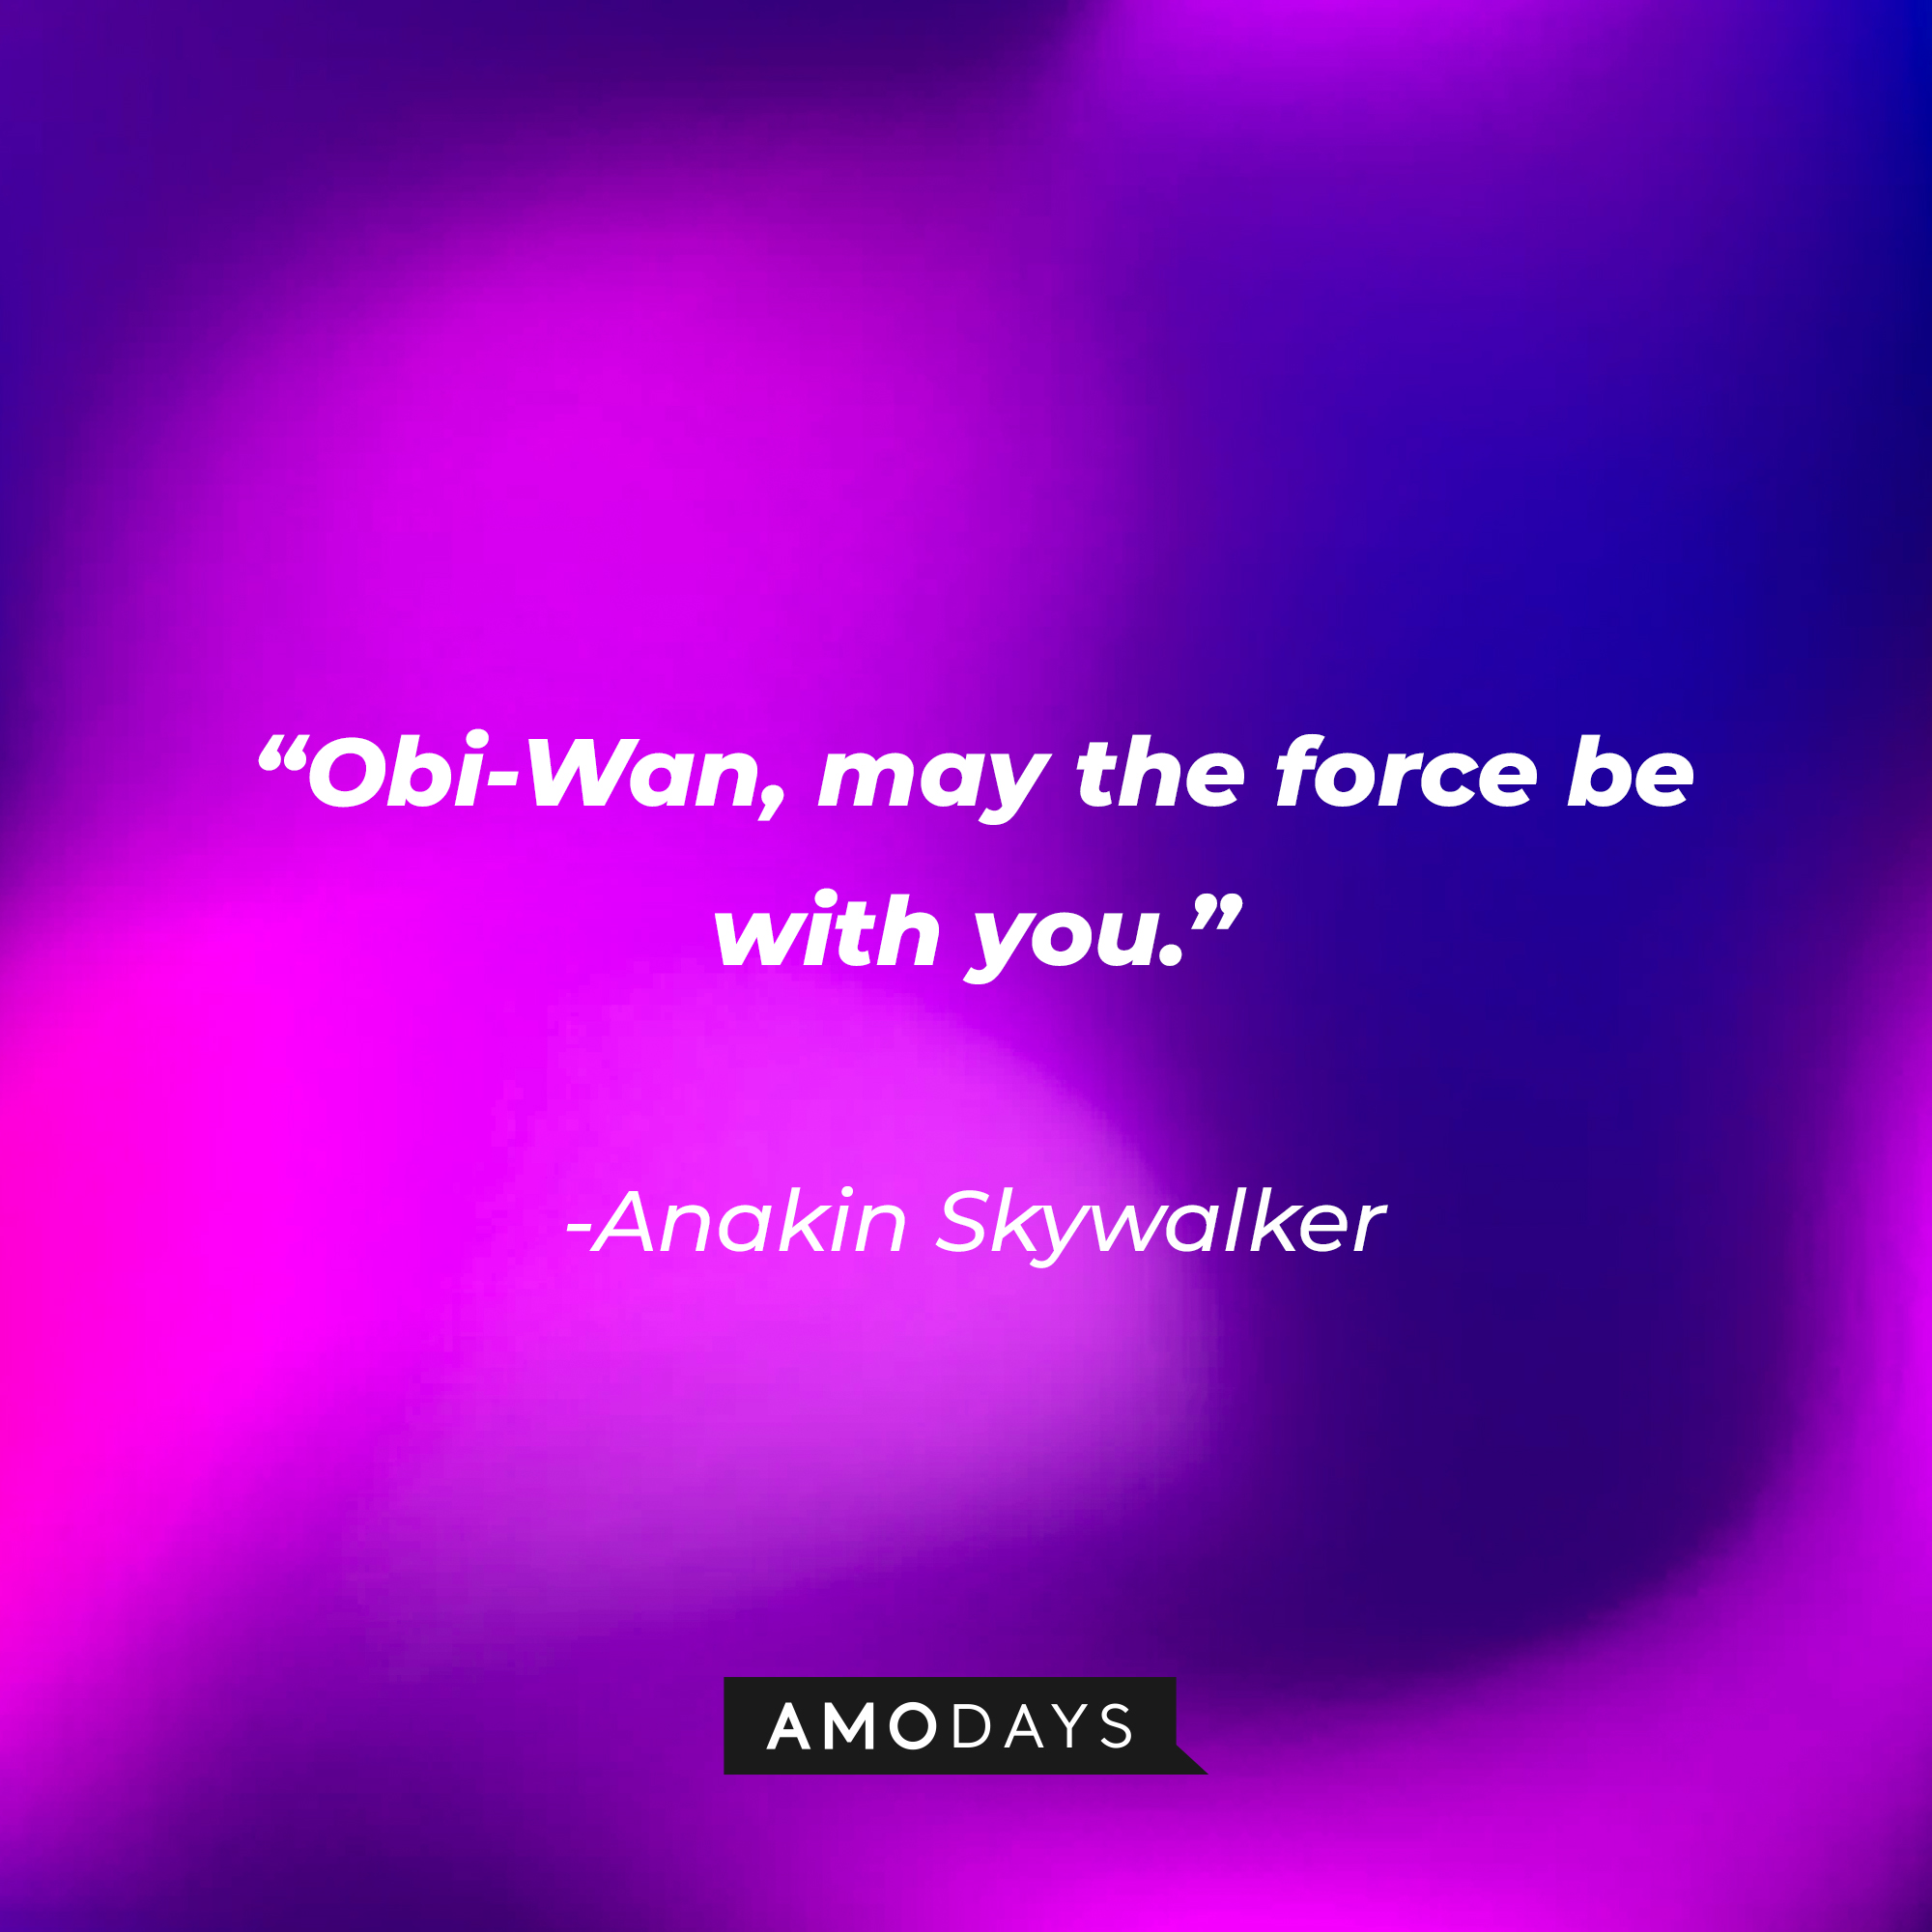 Anakin Skywalker’s quote: “Obi-Wan, may the force be with you.” | Source: AmoDays